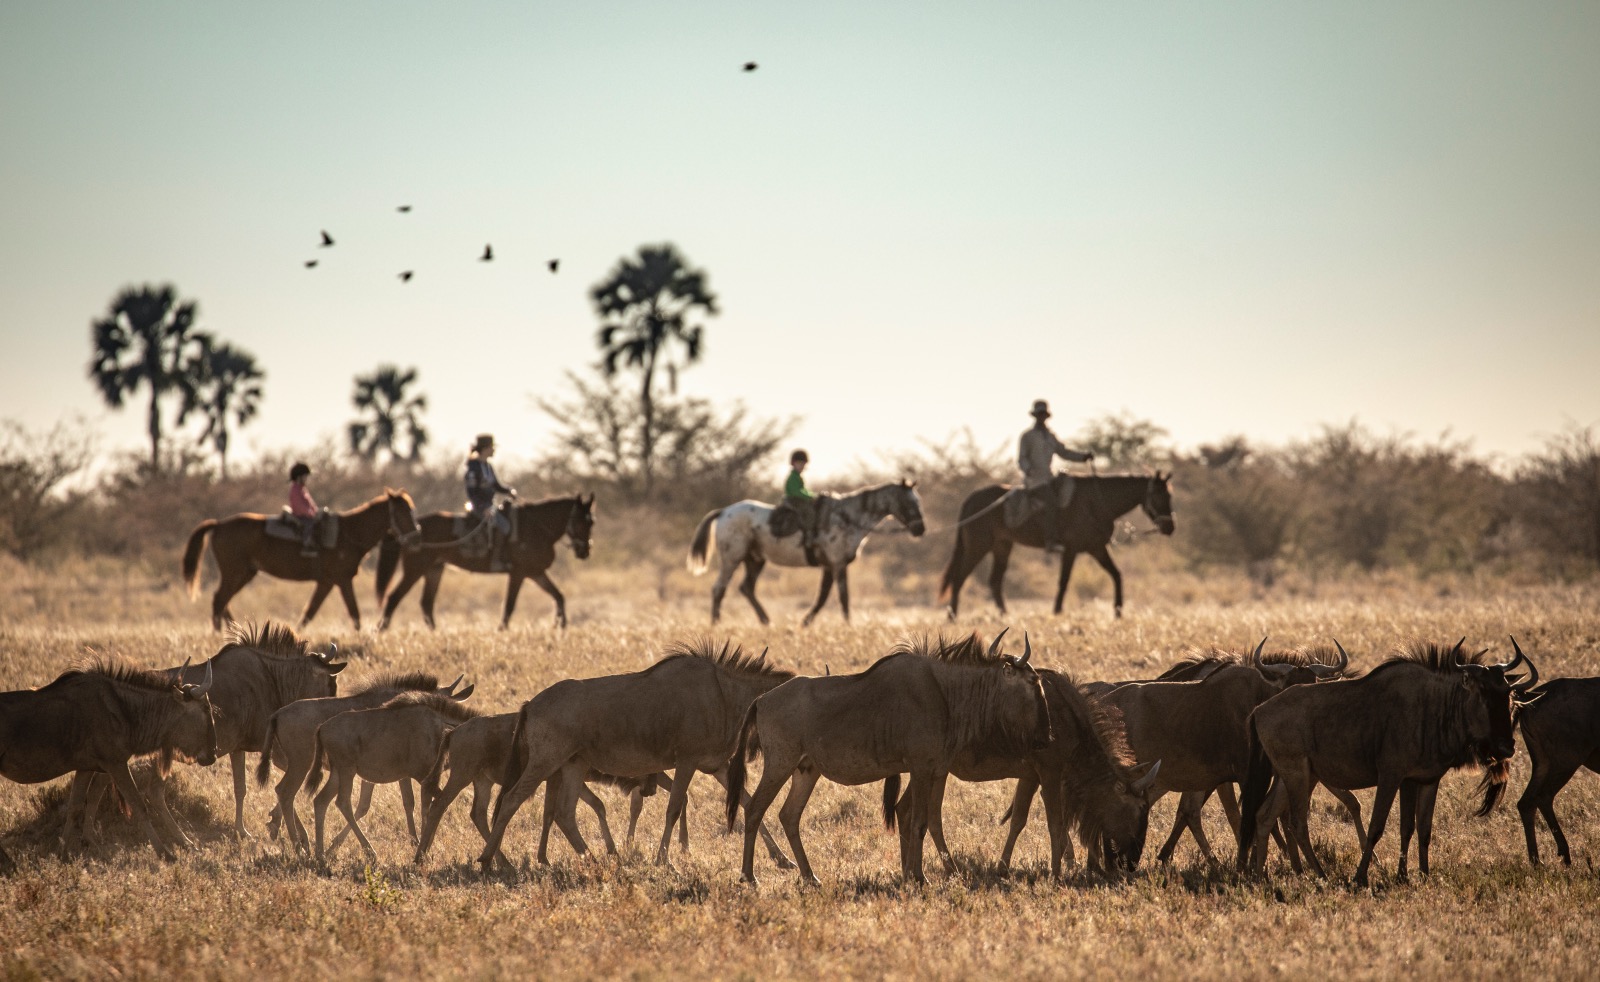 A herd of wildebeest in the foreground are watched by people on horseback in the background in Botswana